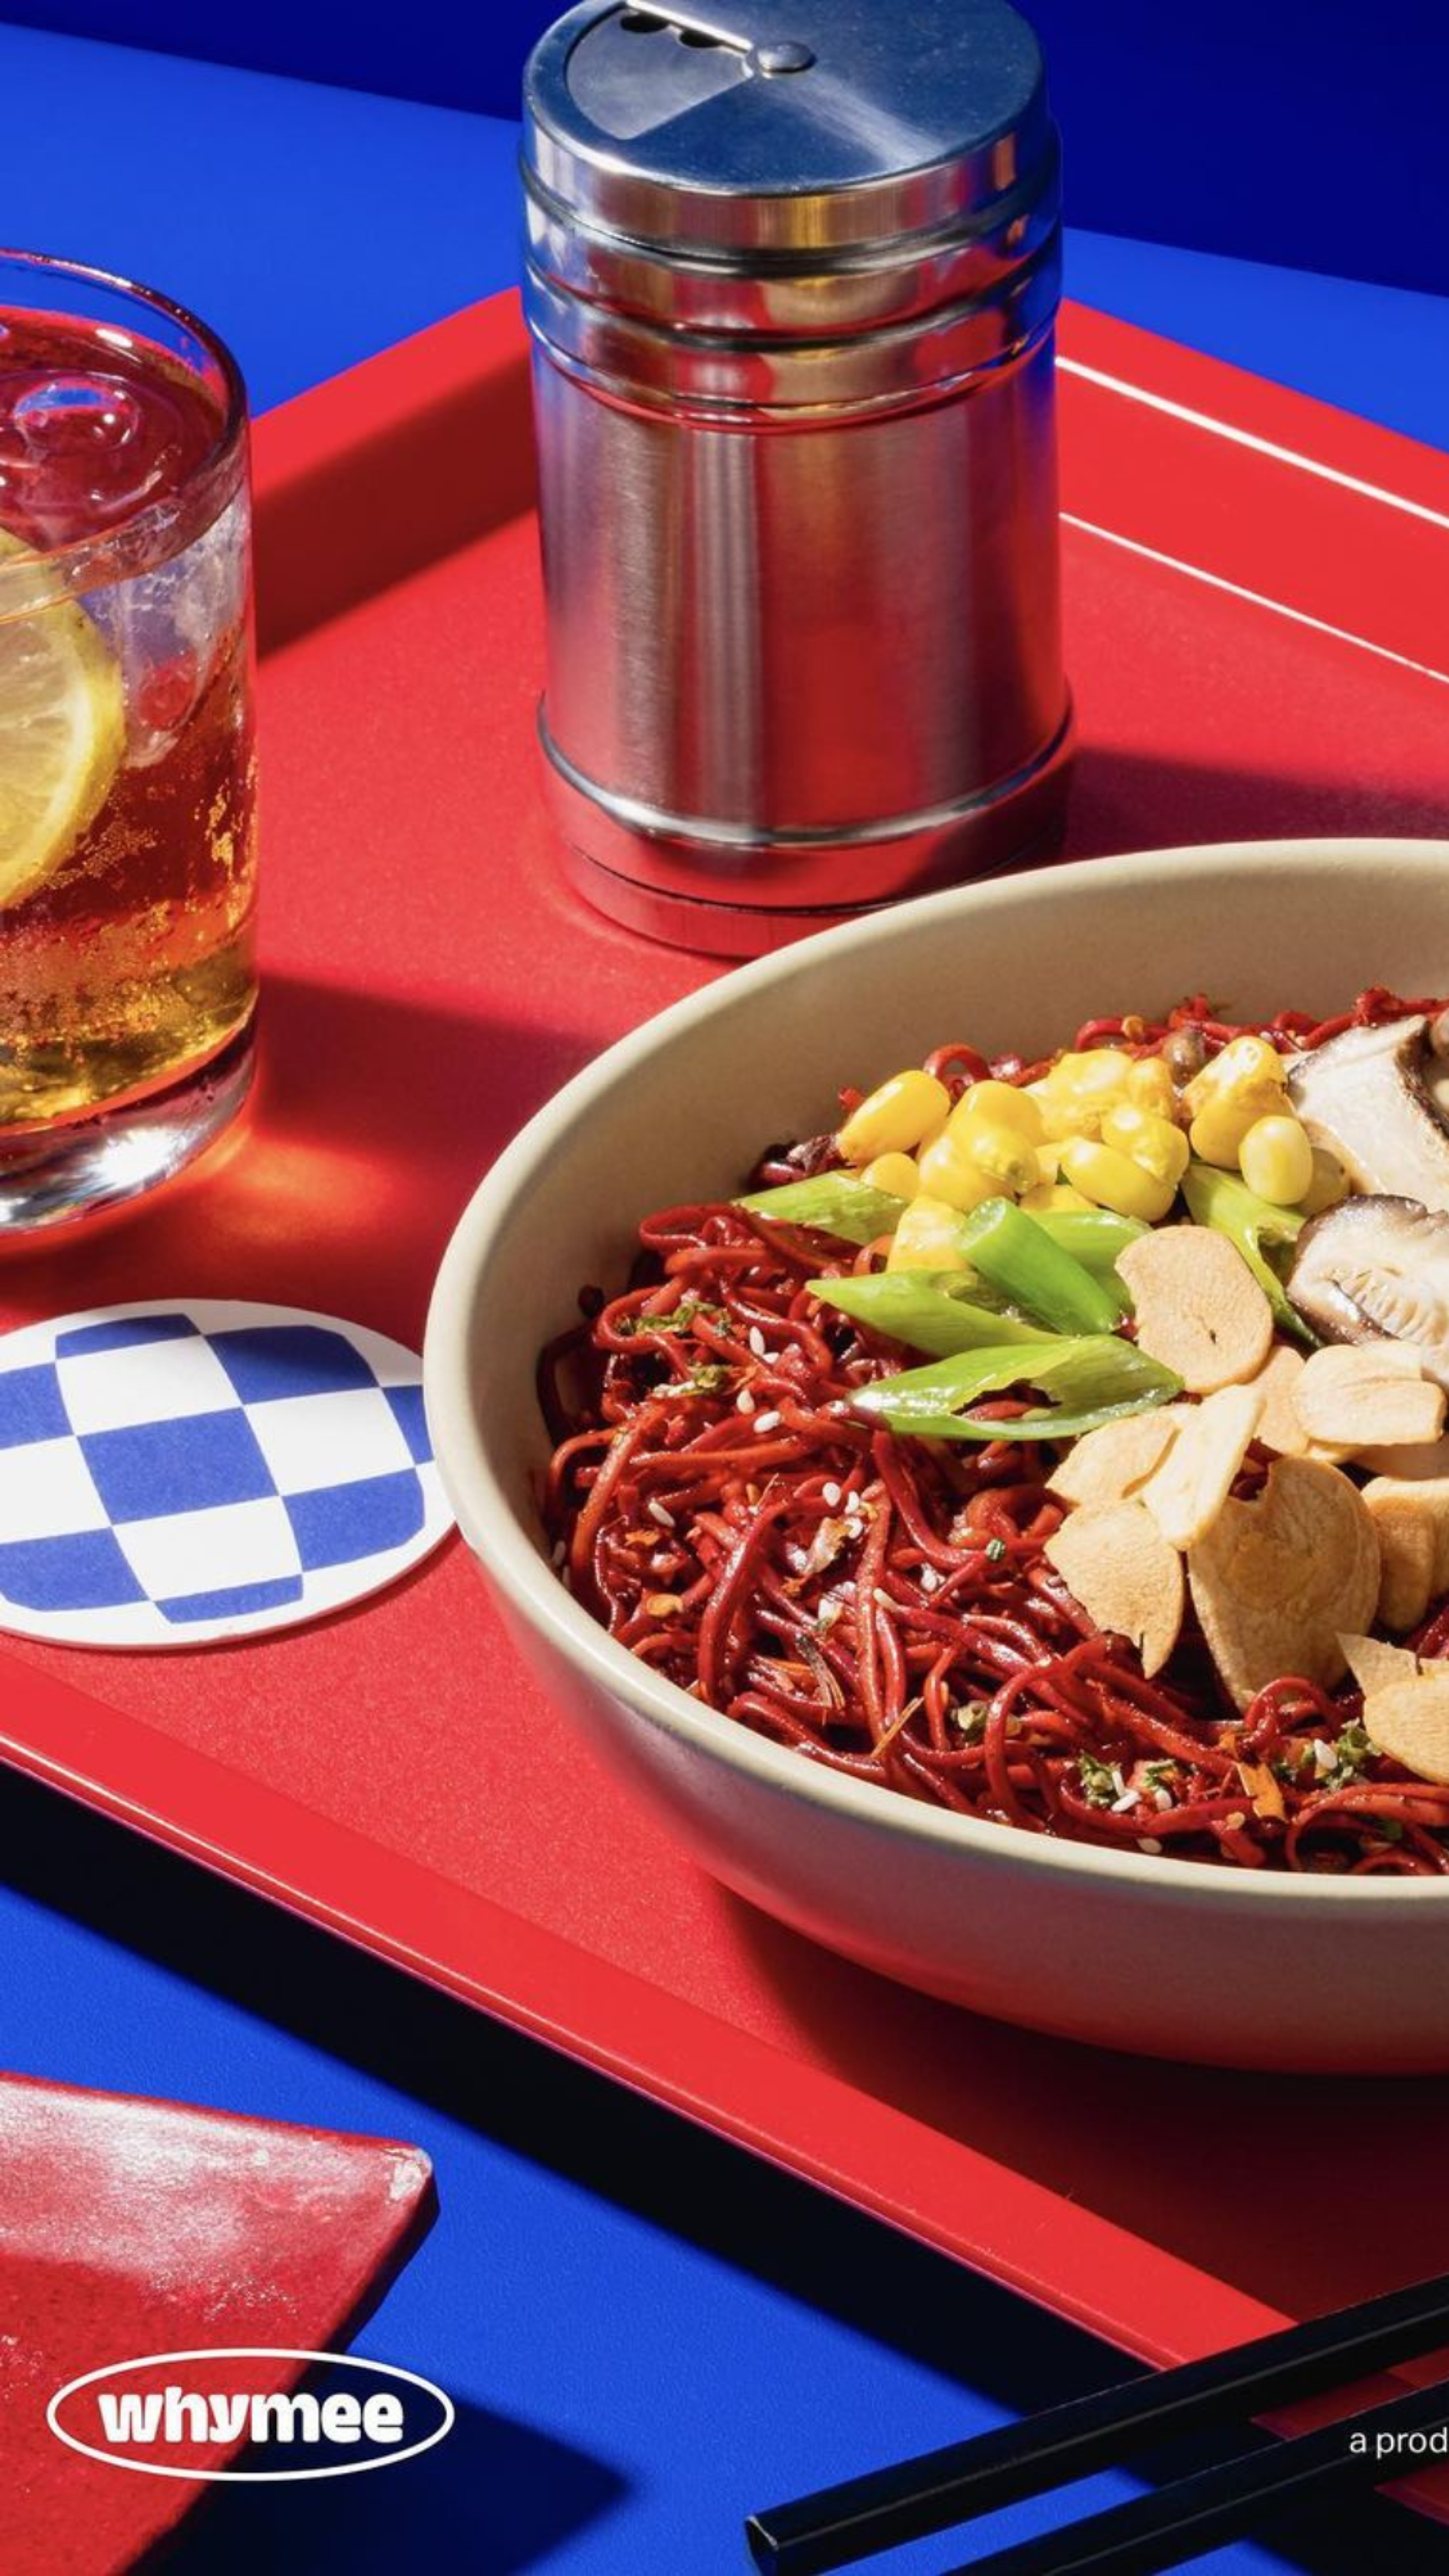 An eye-catching food presentation showcasing a bowl of red noodles topped with corn and sliced meats, beside a glass of iced tea on a red tray over a blue table.